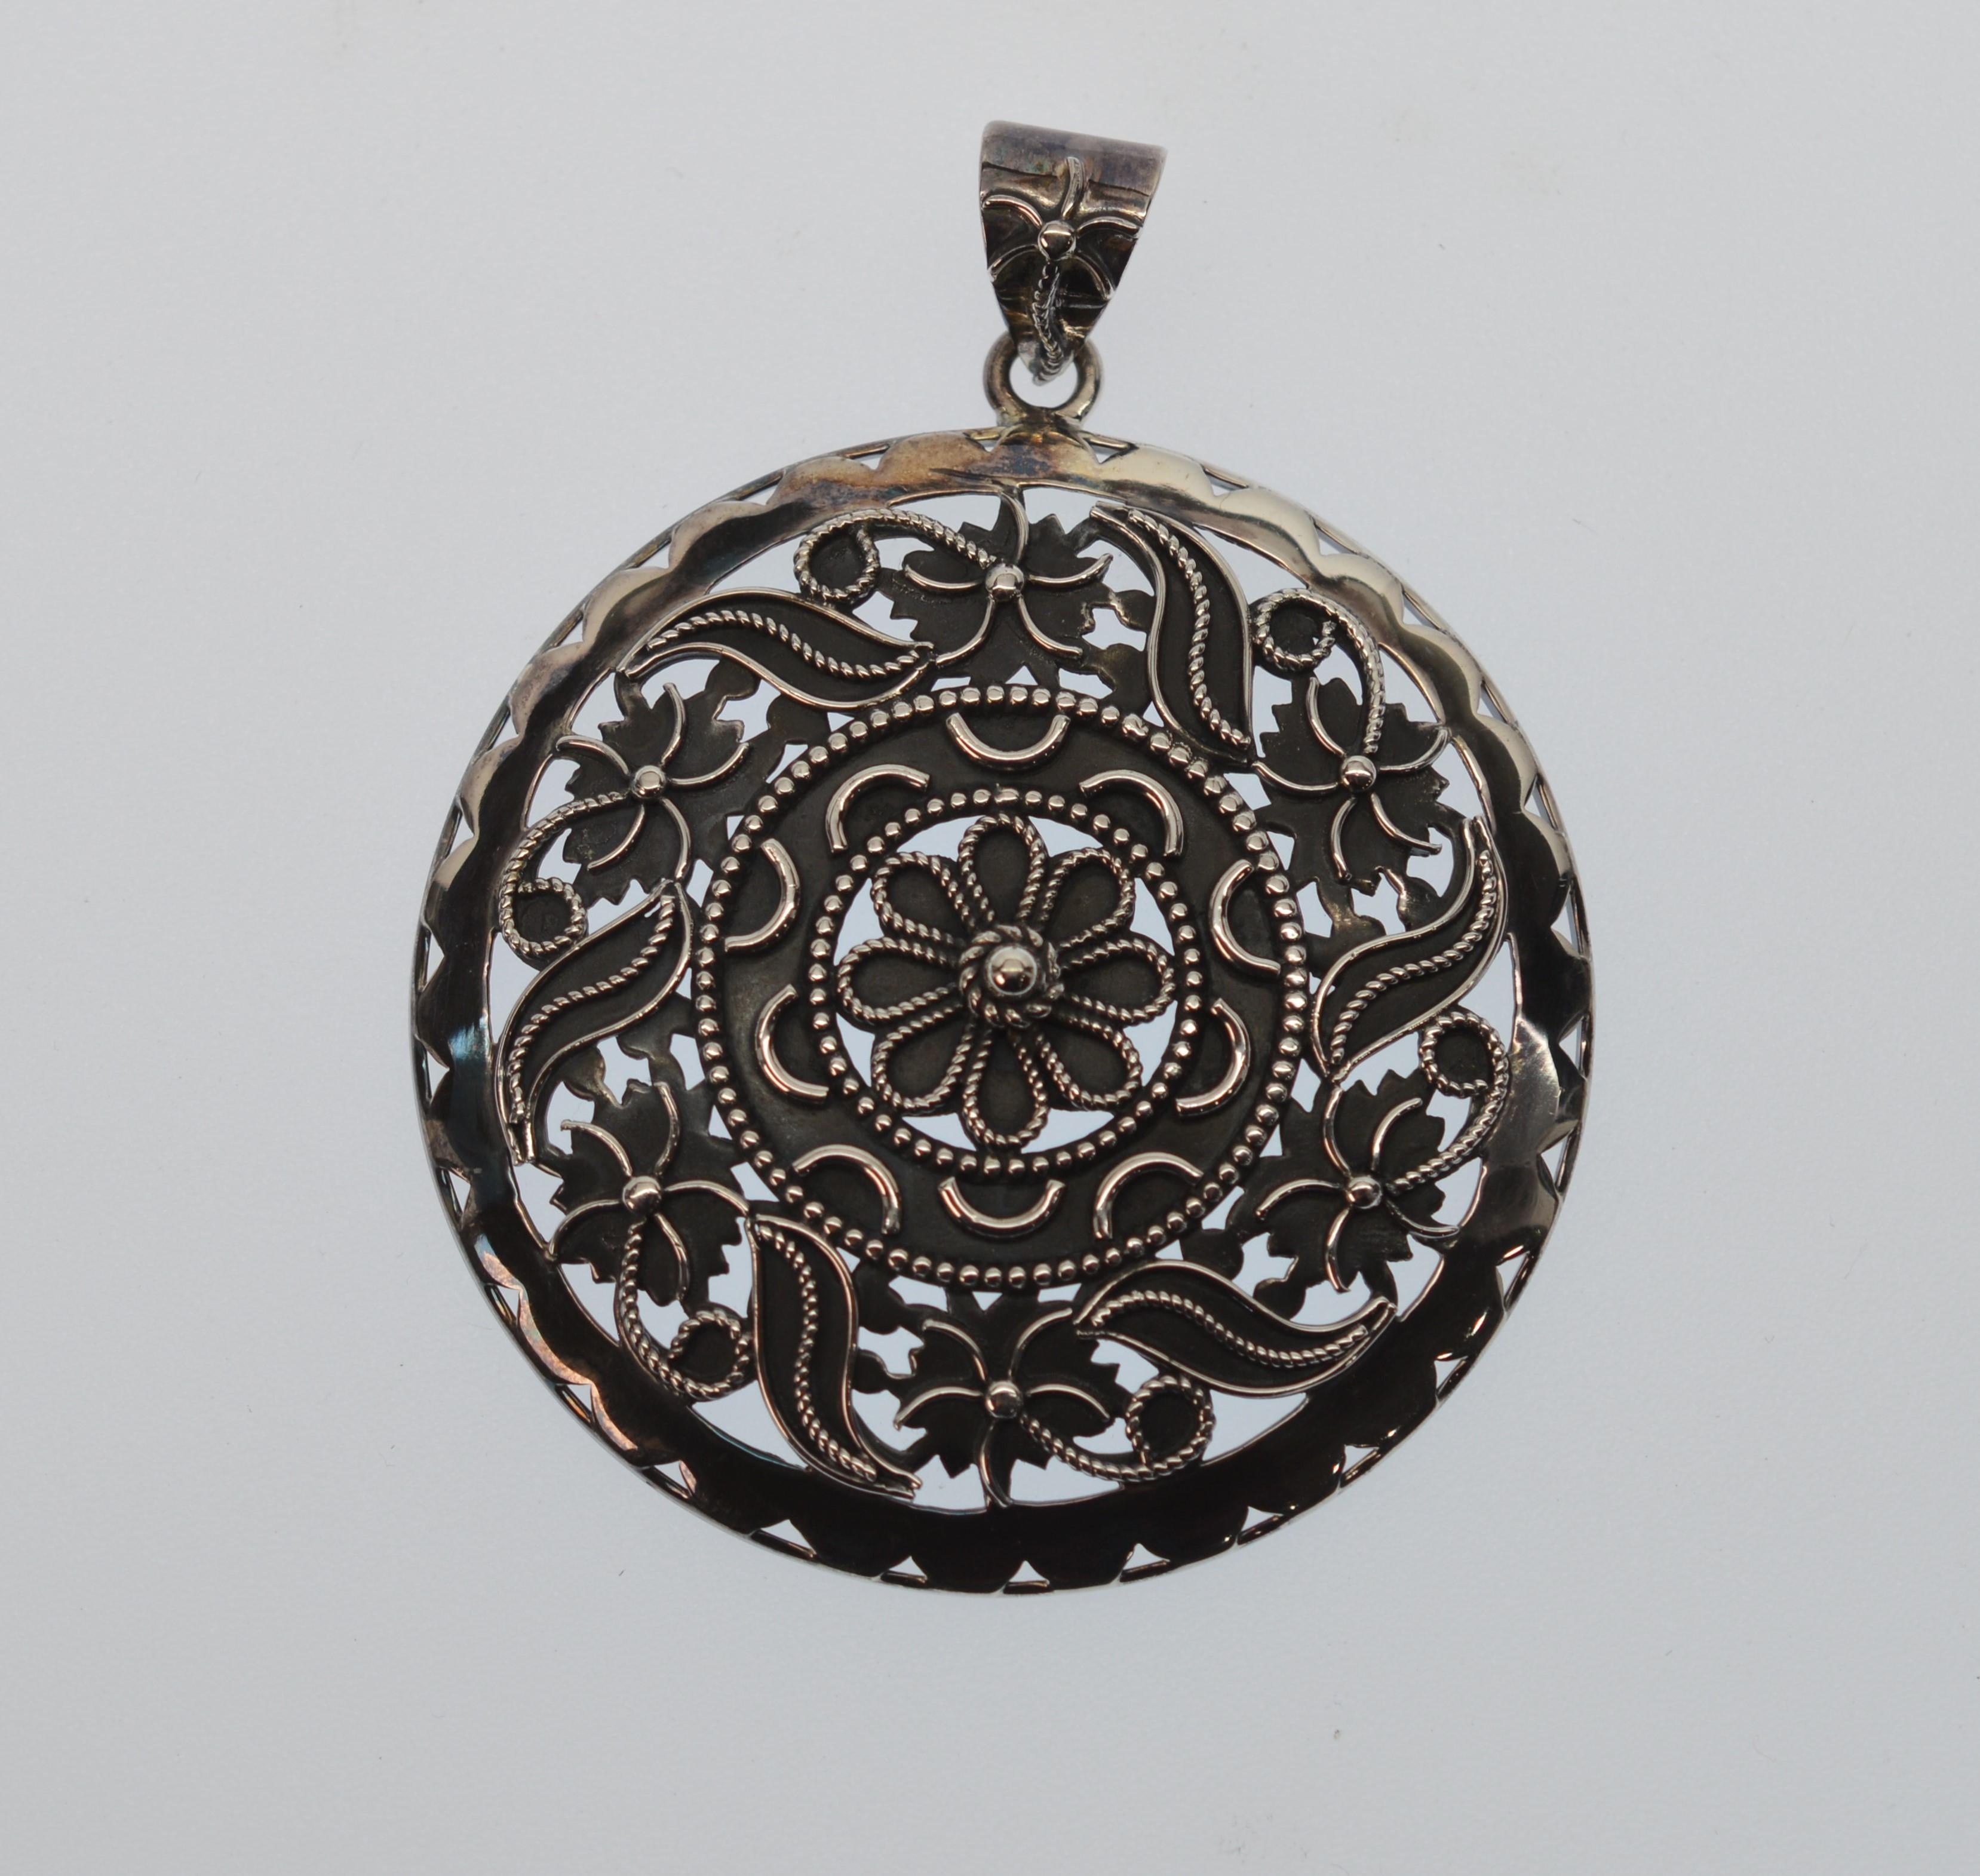 Bold Sterling Silver Medallion Pendant with hand applied scroll work over oxidized Sterling Silver to highlight the attractive detail and craftsmanship. Measuring  2-1/4 inches in diameter, the pendant is outfitted with a matching decorative bail.